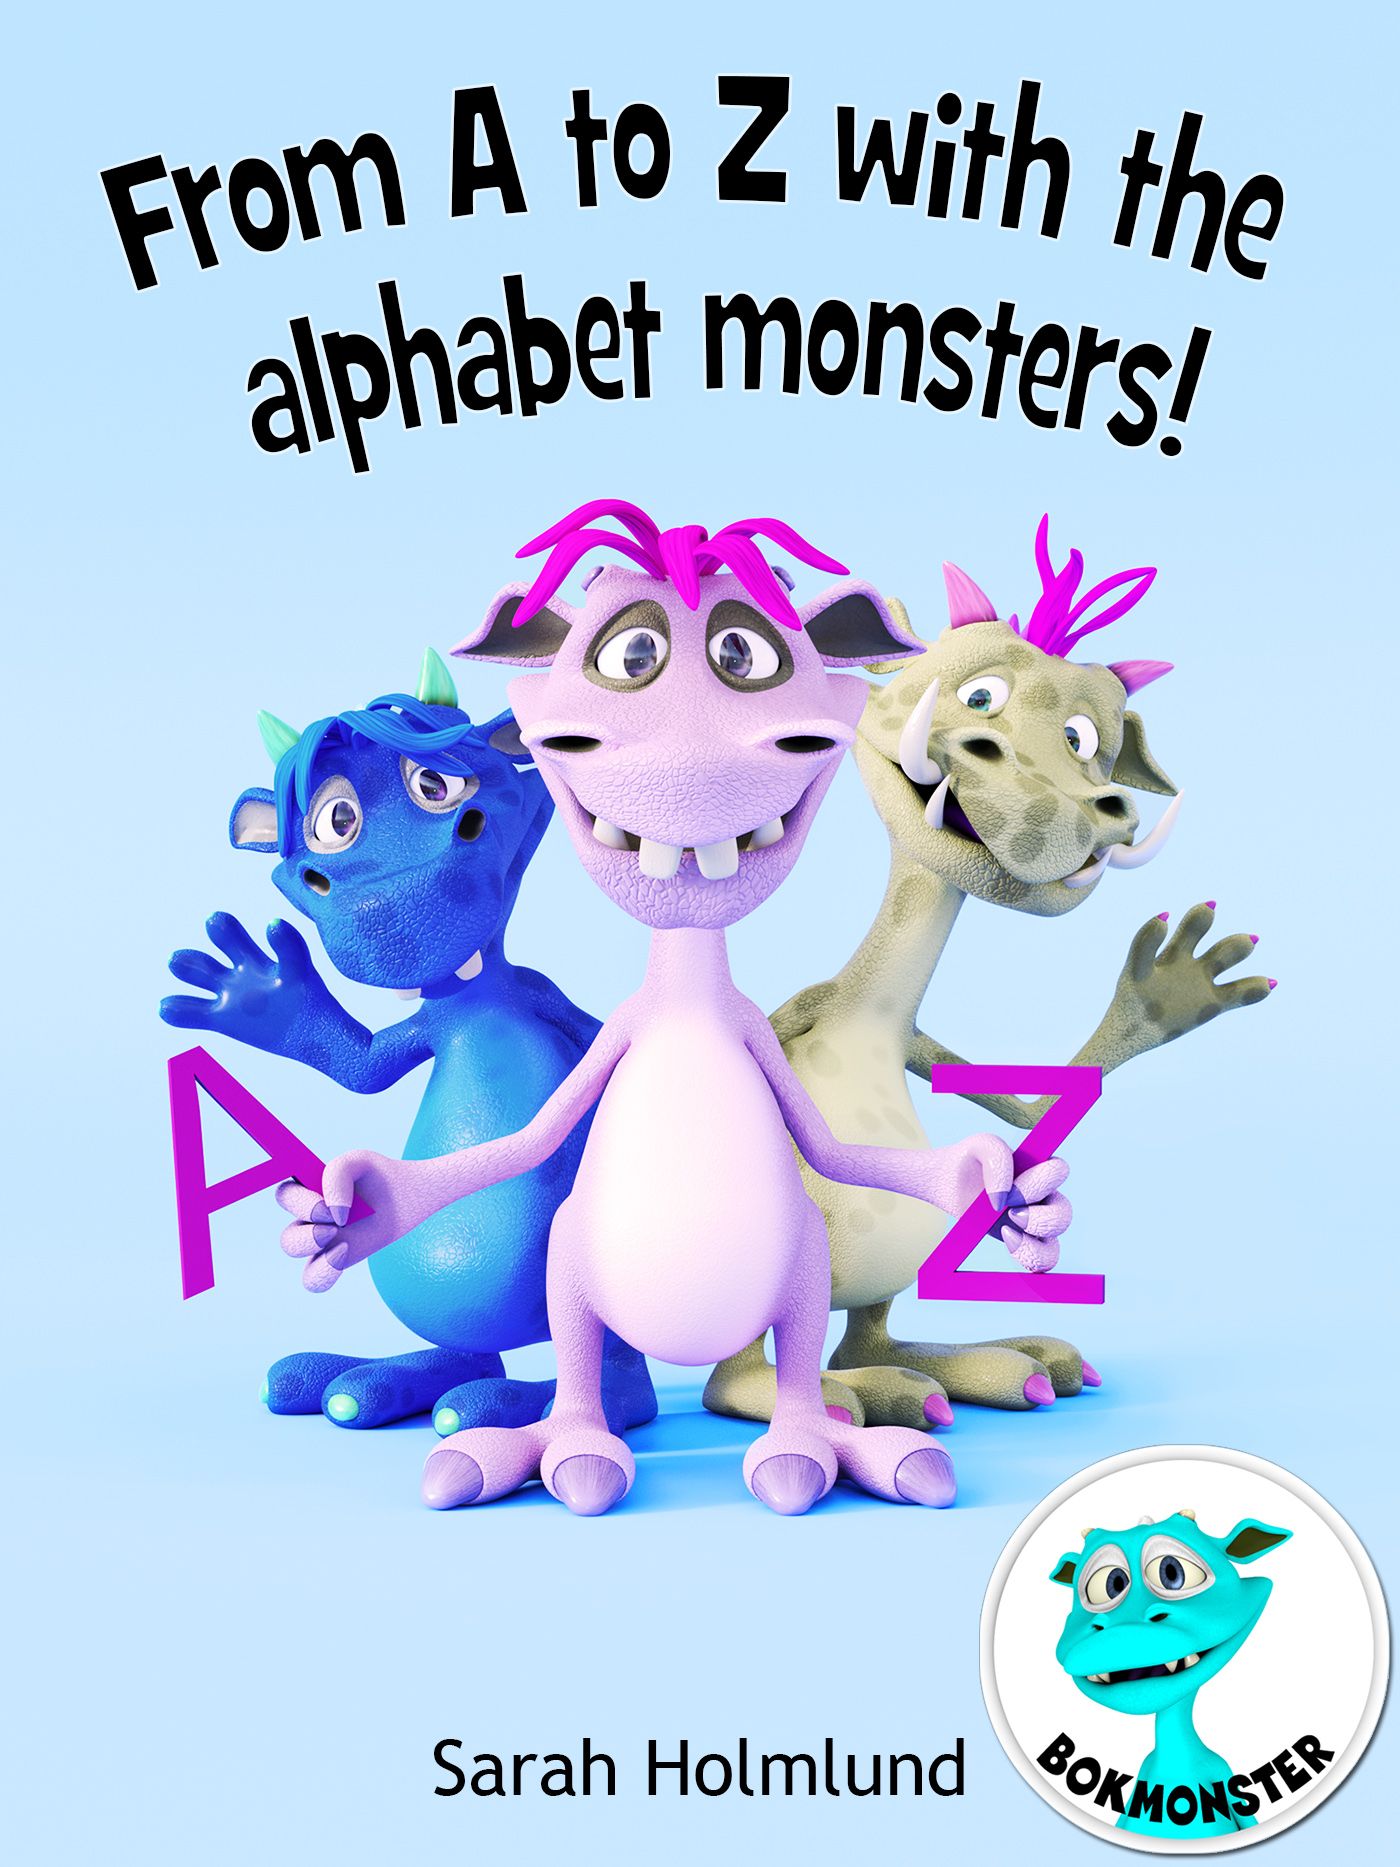 From A to Z with the alphabet monsters!, e-bog af Sarah Holmlund